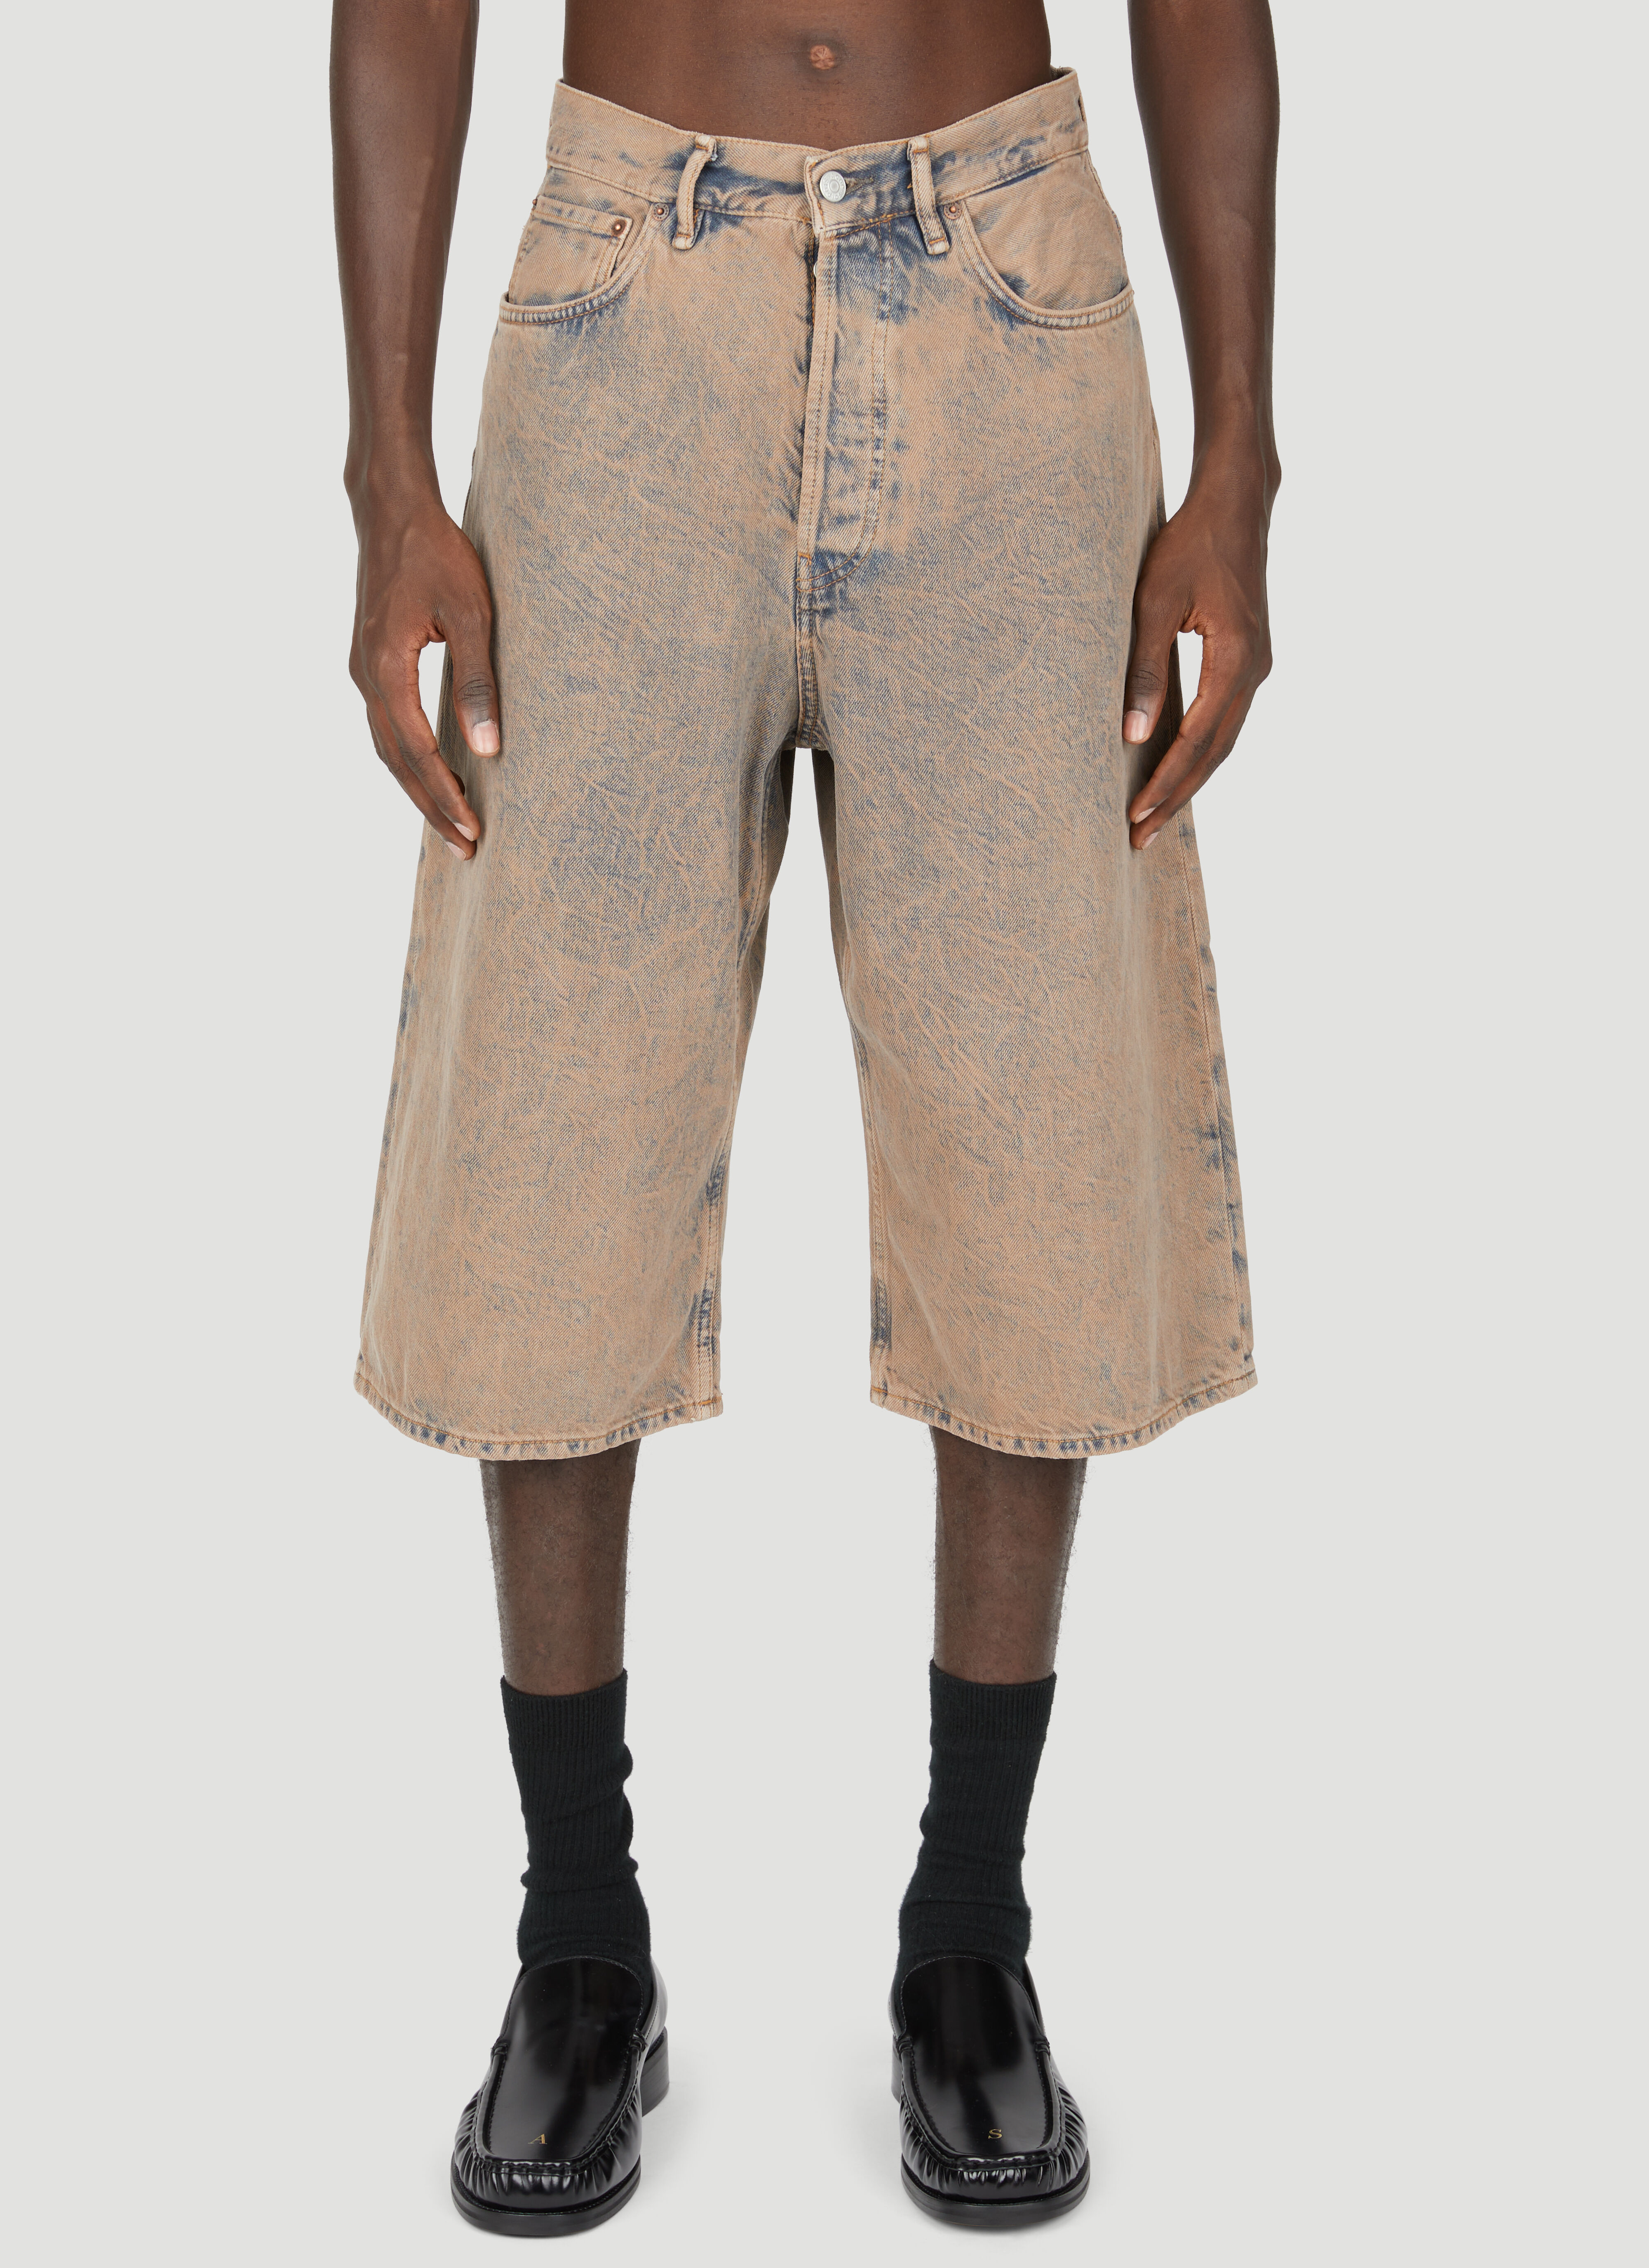 Acne Studios Washed Relaxed Bermuda Shorts Brown acn0153019